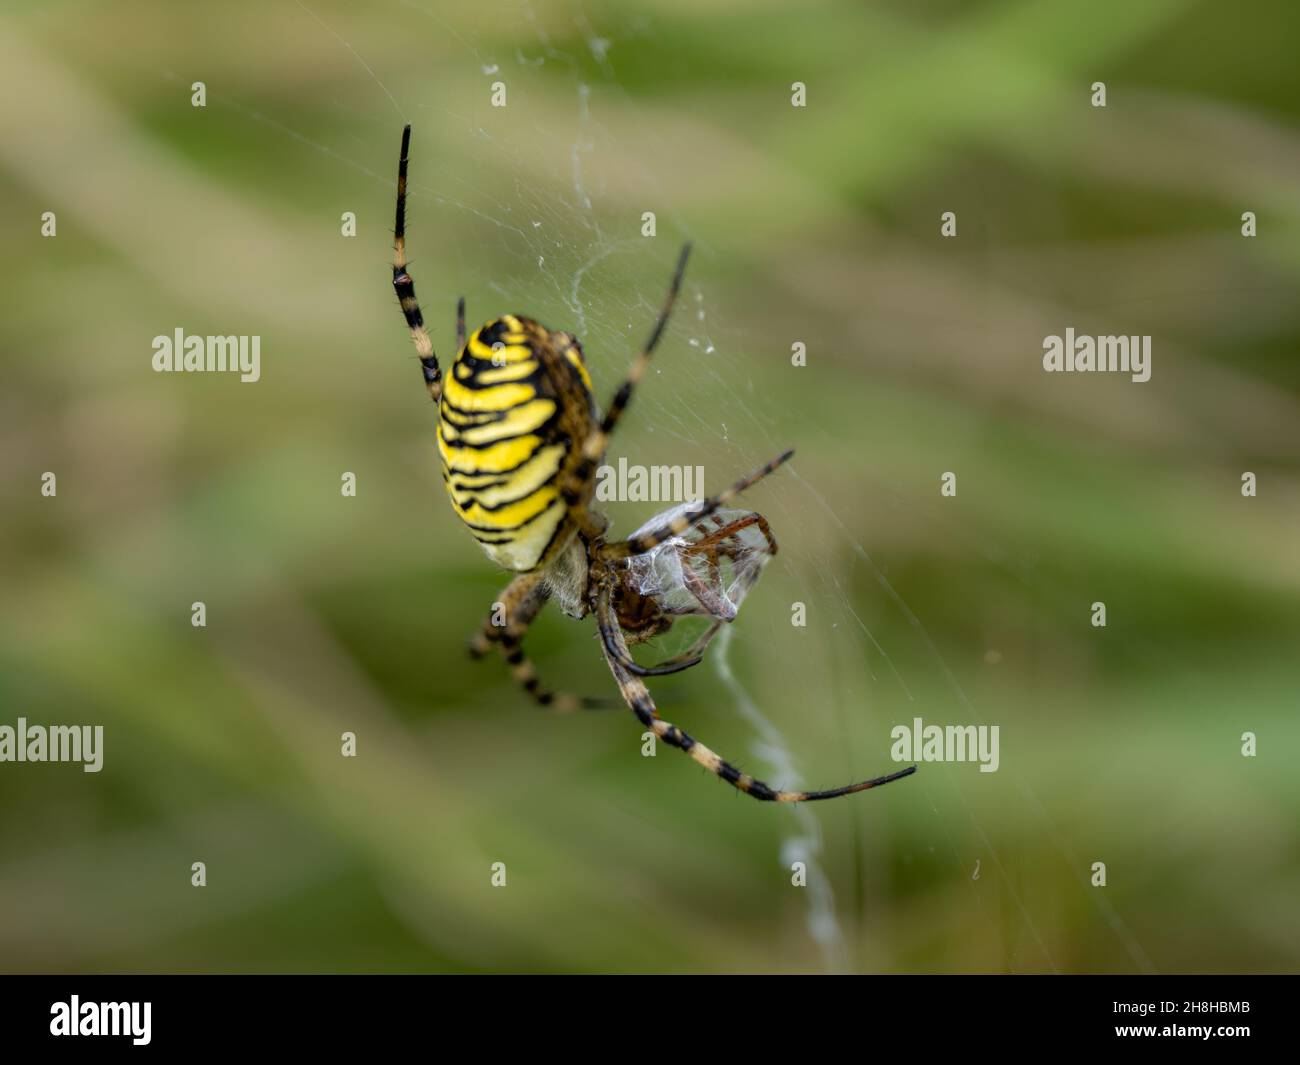 Wasp Spider Predating a Male Wasp Spider aftre Mating Stock Photo